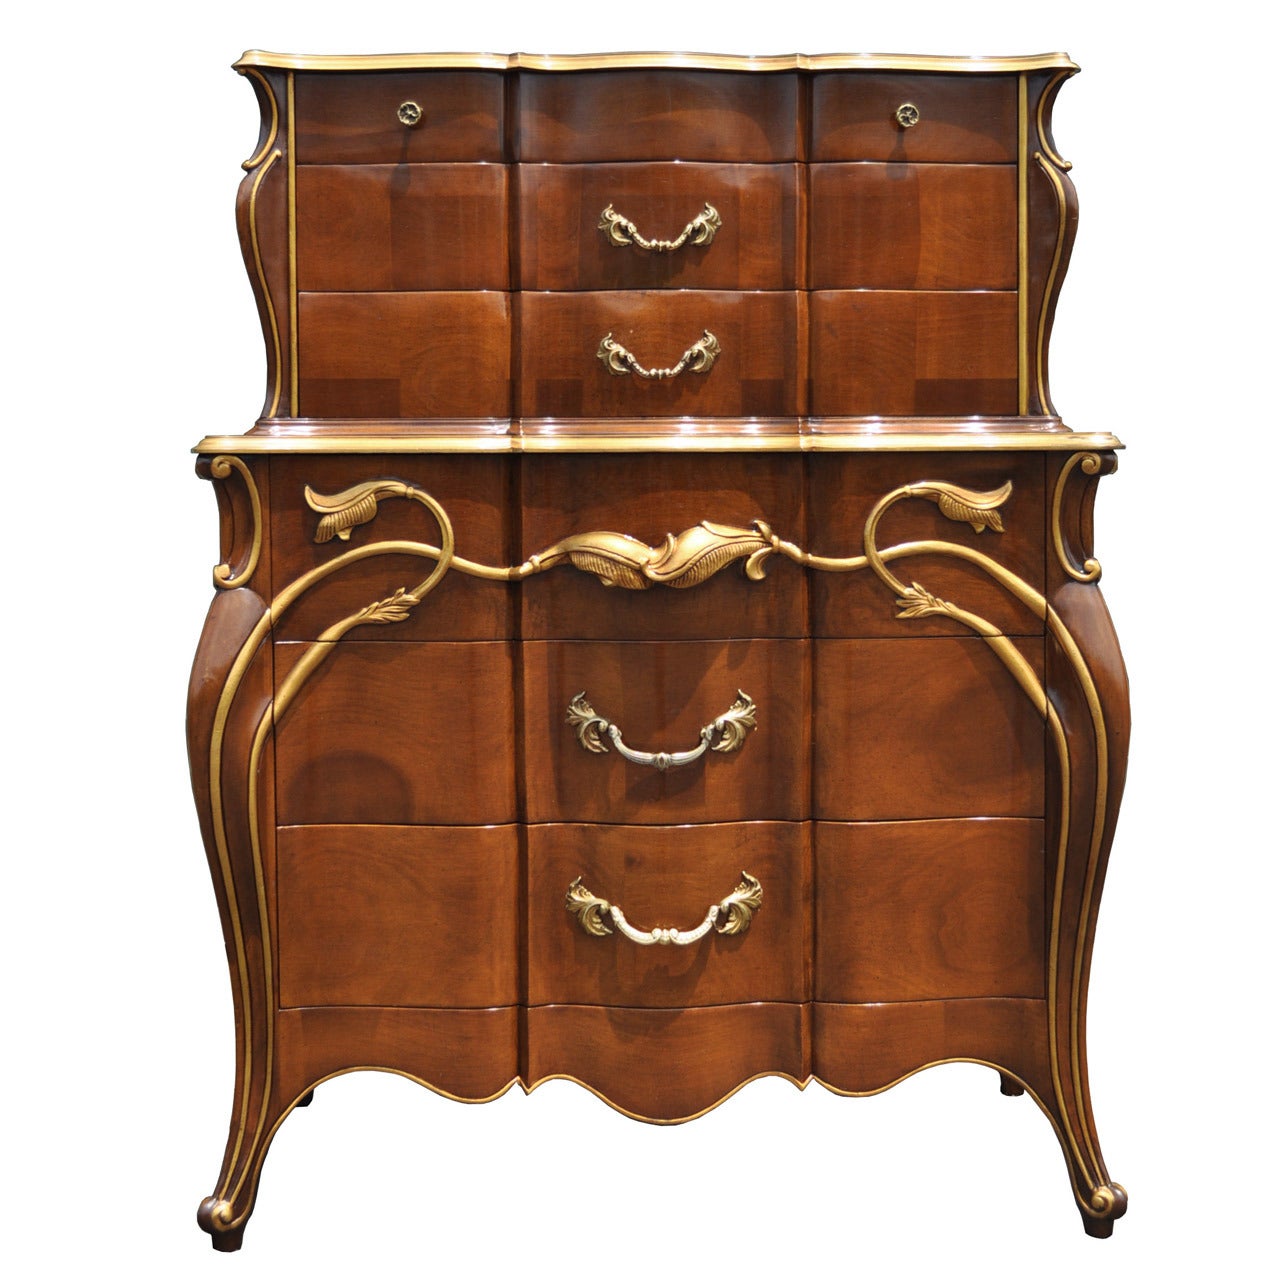 Vintage Art Nouveau Style Solid Cherry Tall Chest or Dresser, Hollywood Regency